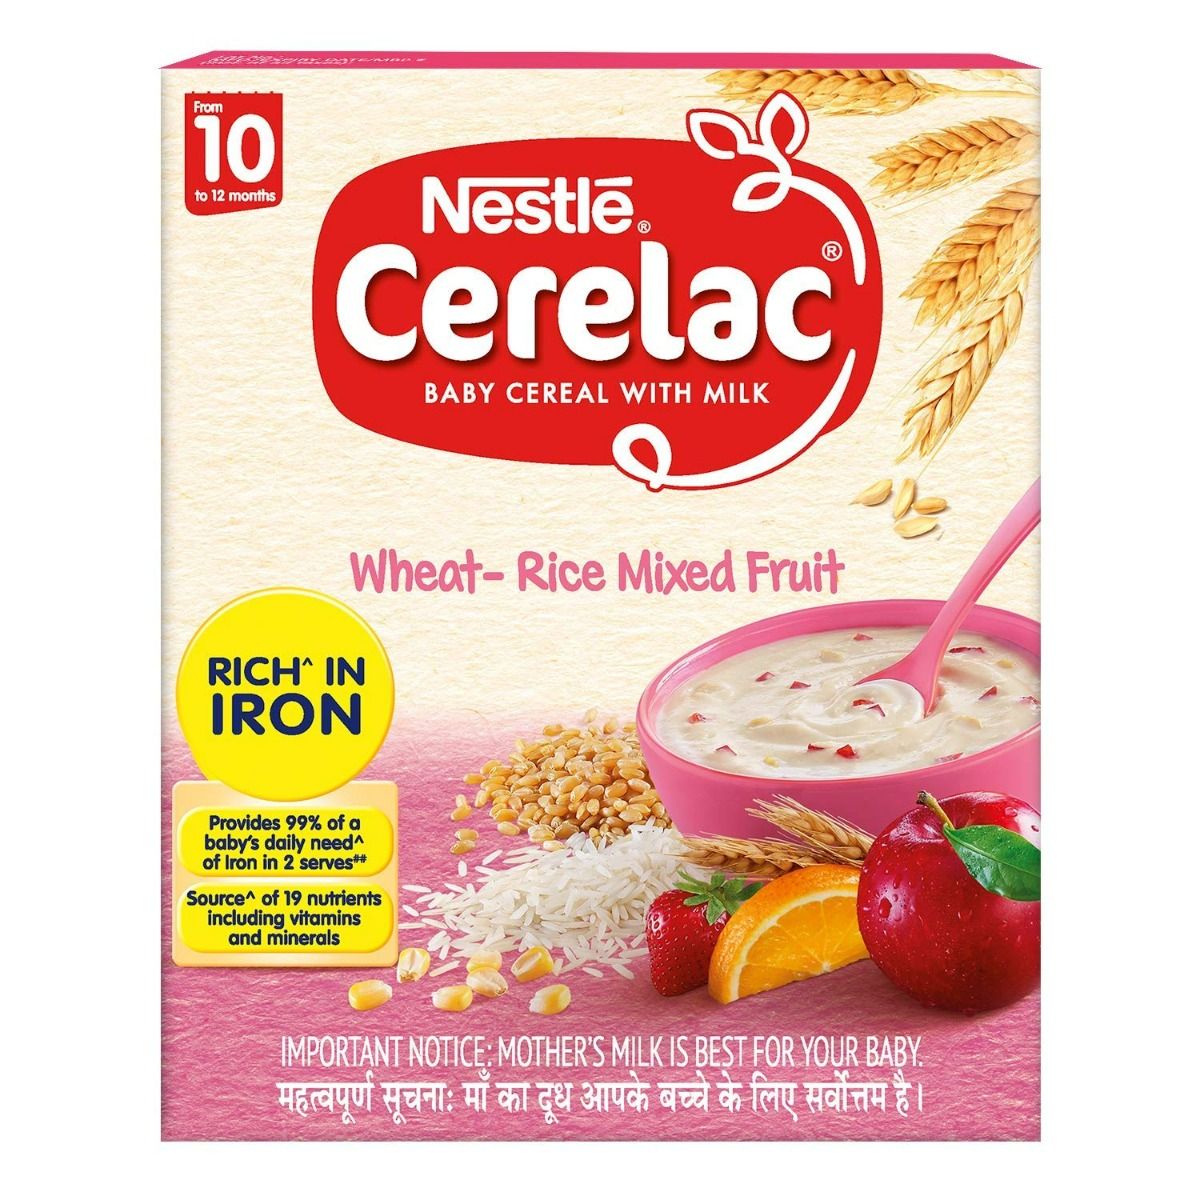 Buy Nestle Cerelac Wheat Rice Mixed Fruit Baby Cereal, 10 to 12 Months, 300 gm Refill Pack Online